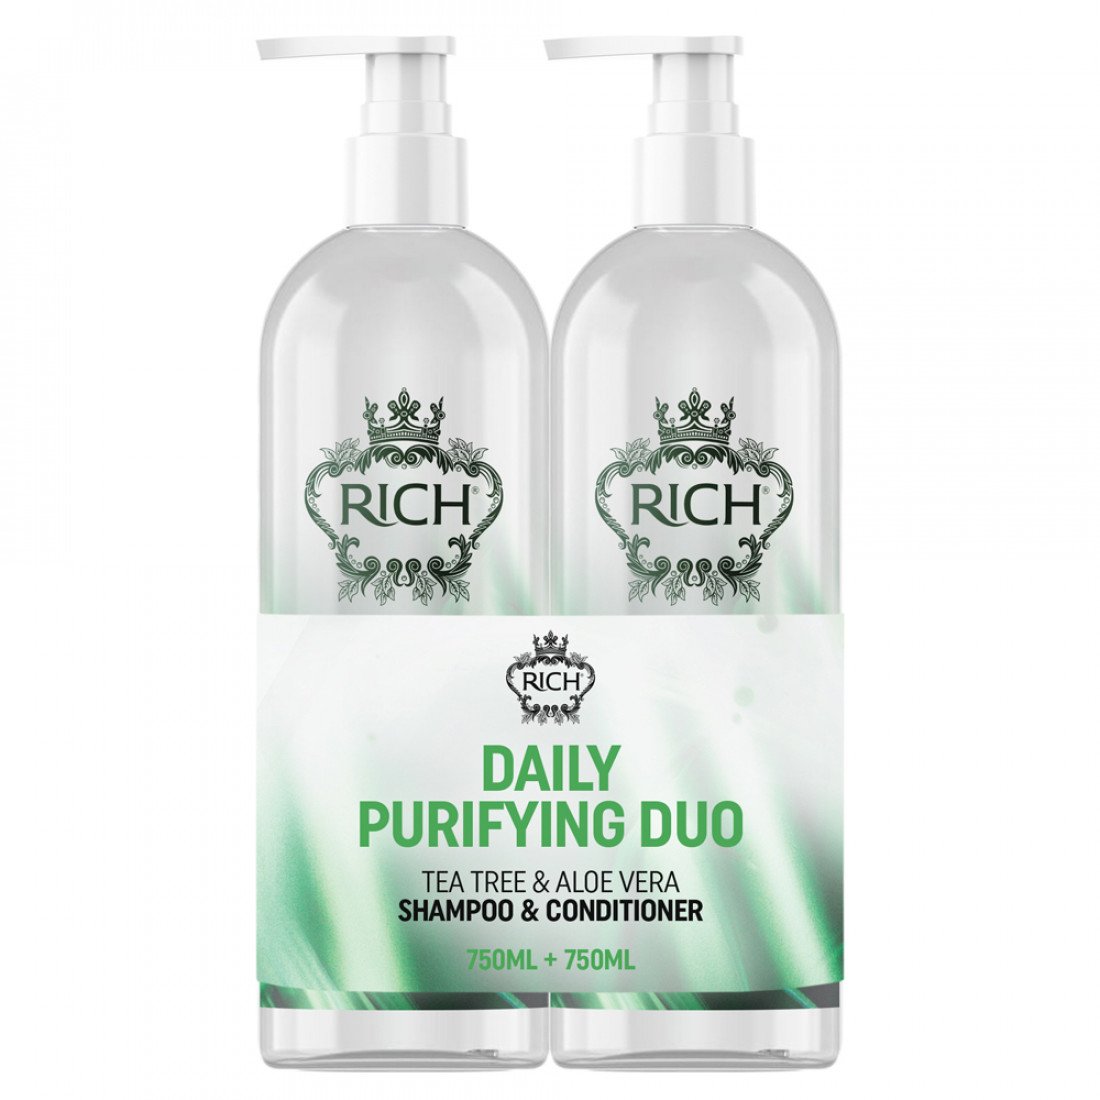 RICH Pure Luxury Daily Purifying Duo